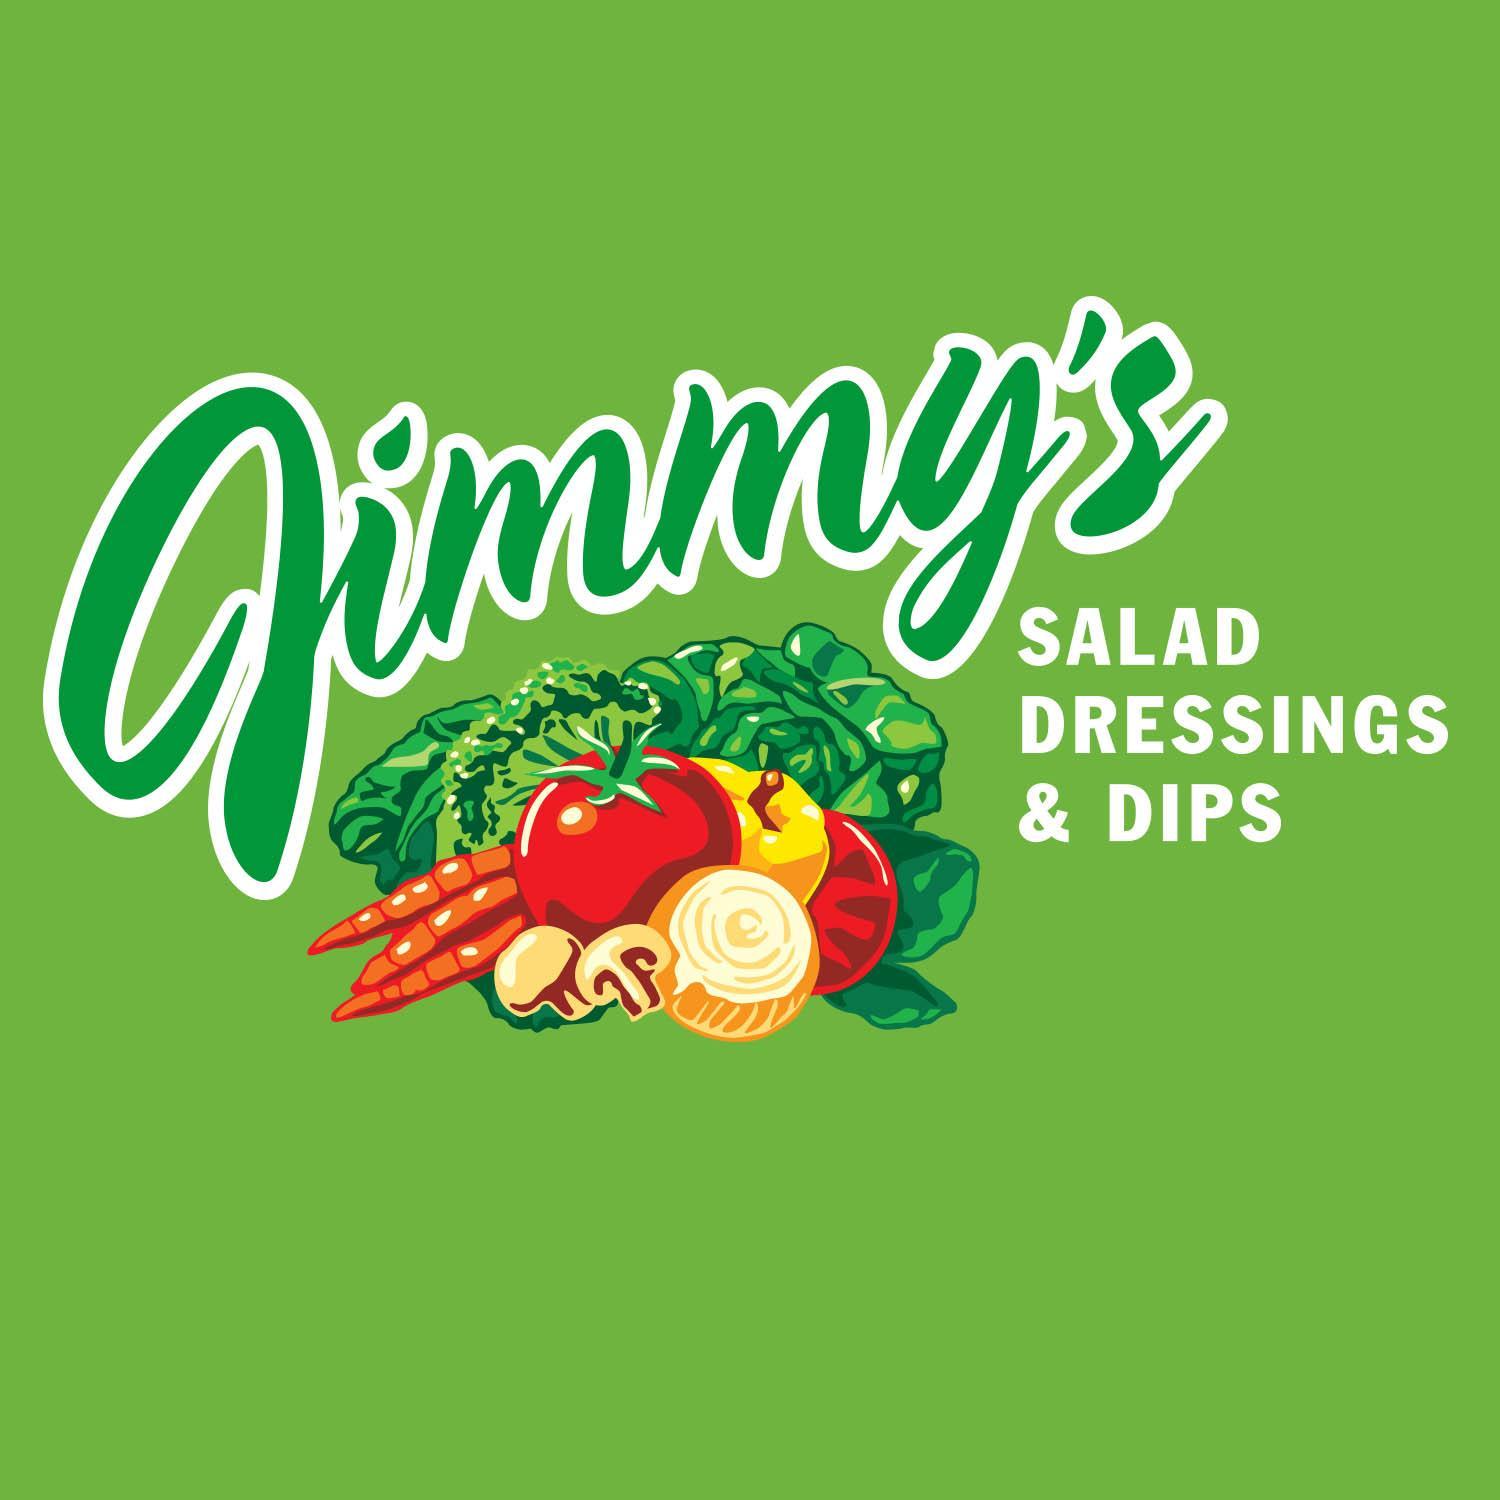 Jimmy's Salad Dressings offers a complete line of refrigerated gourmet salad dressings and dips to suit every taste, find us in your grocer's produce department